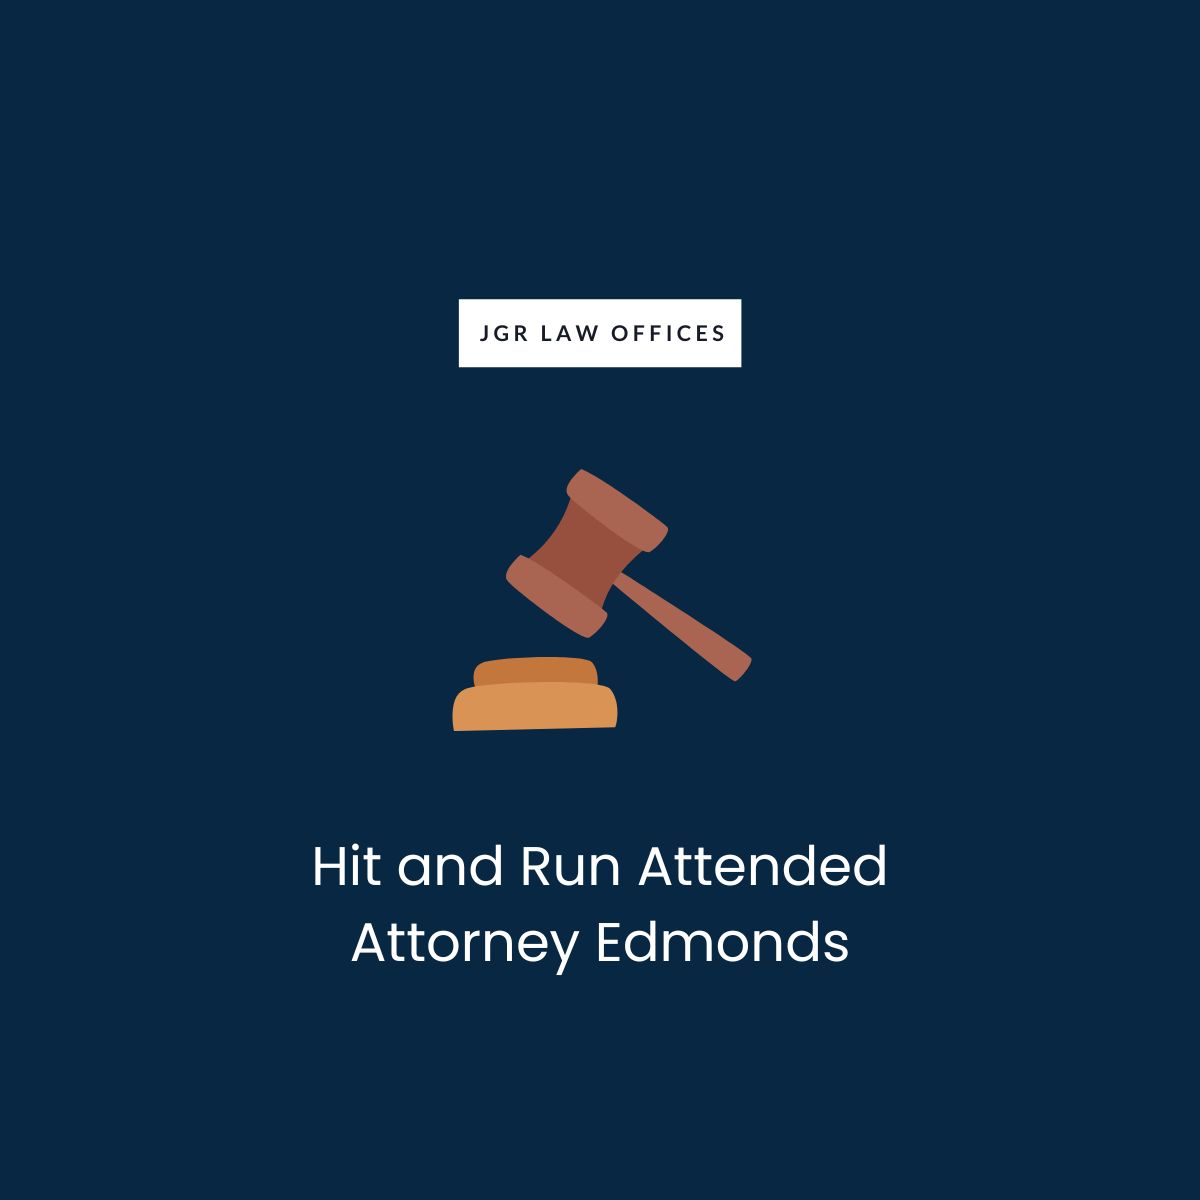 Hit and Run Attended Attorney Edmonds